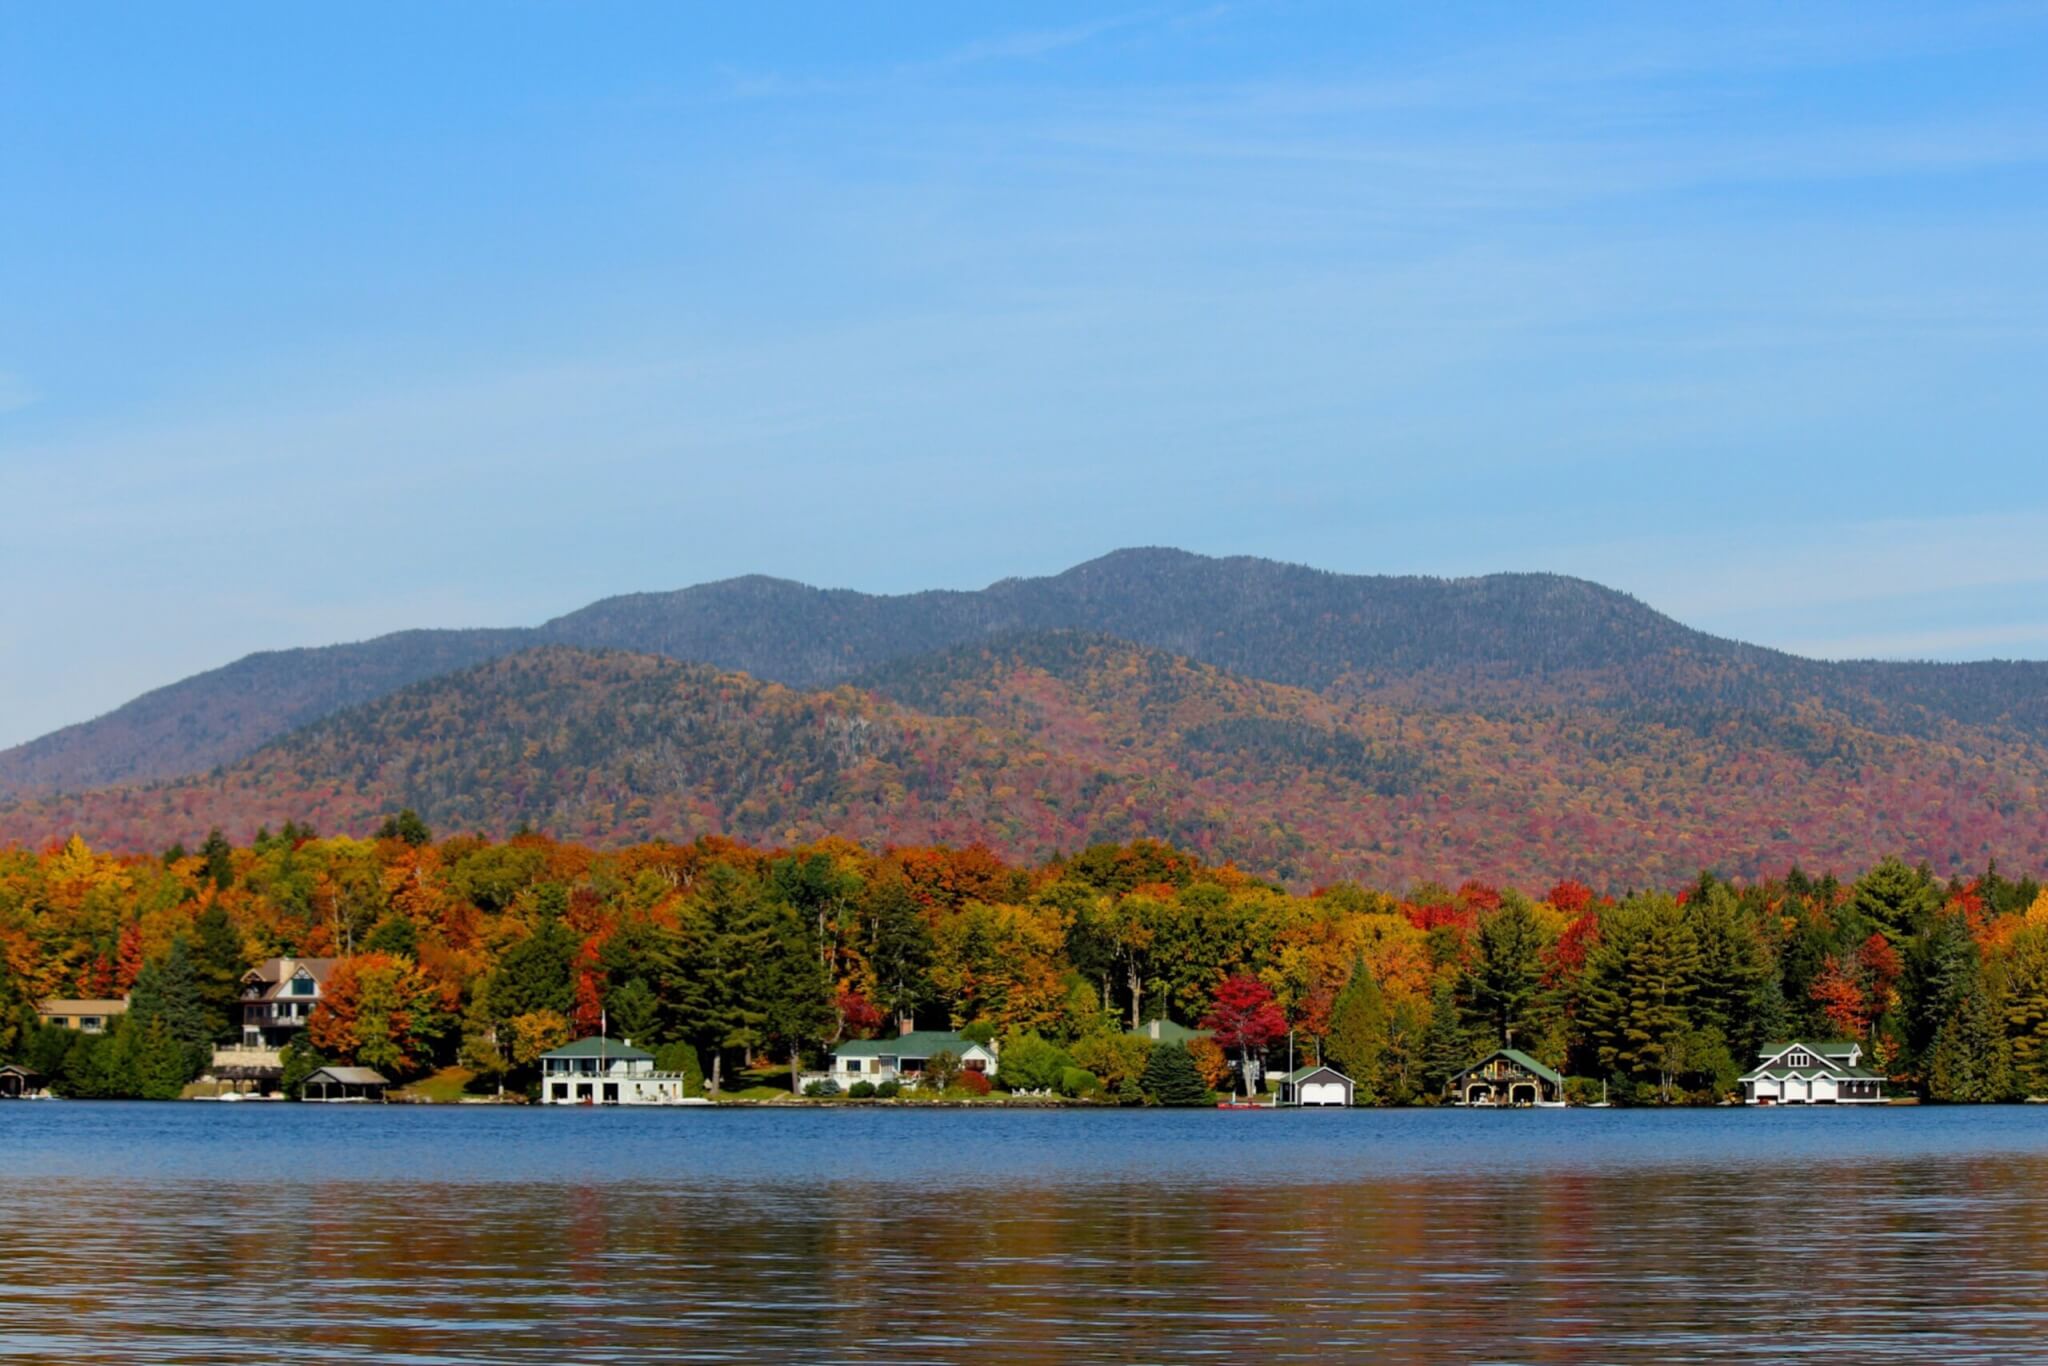 Lake Placid during the fall